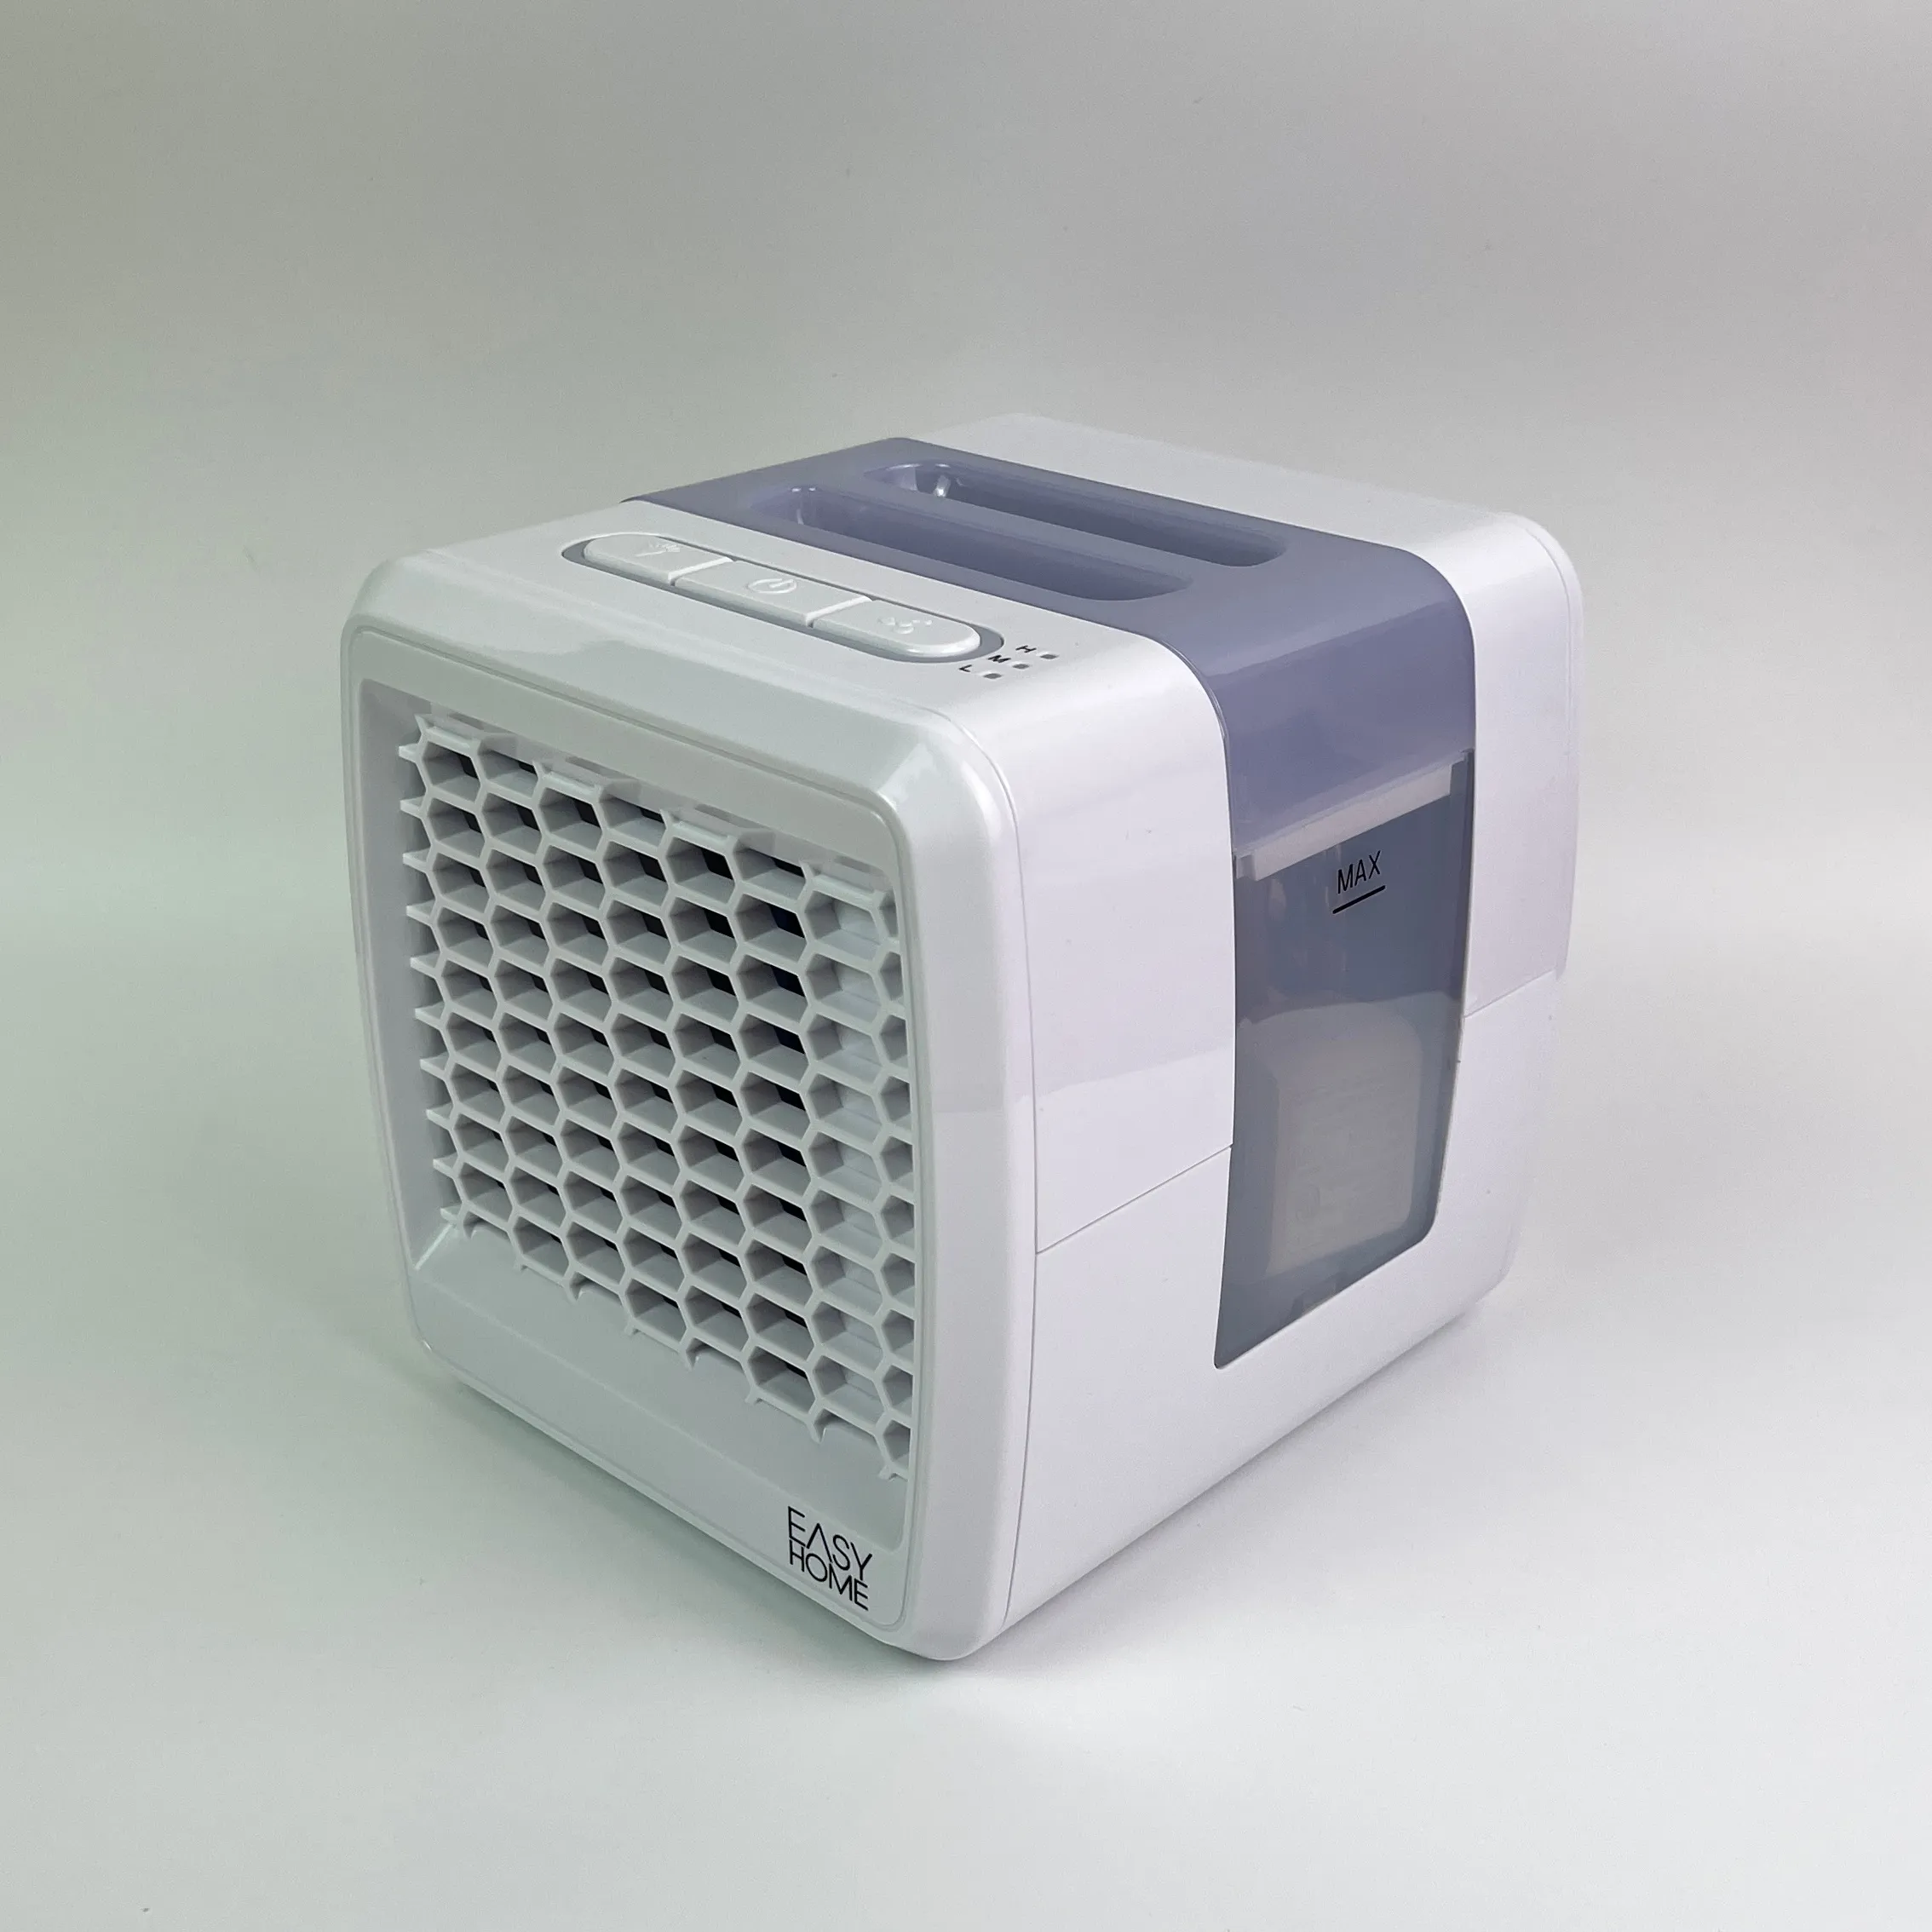 Hot Selling Small 5v Air Conditioner Portable Personal Space Office Cooler